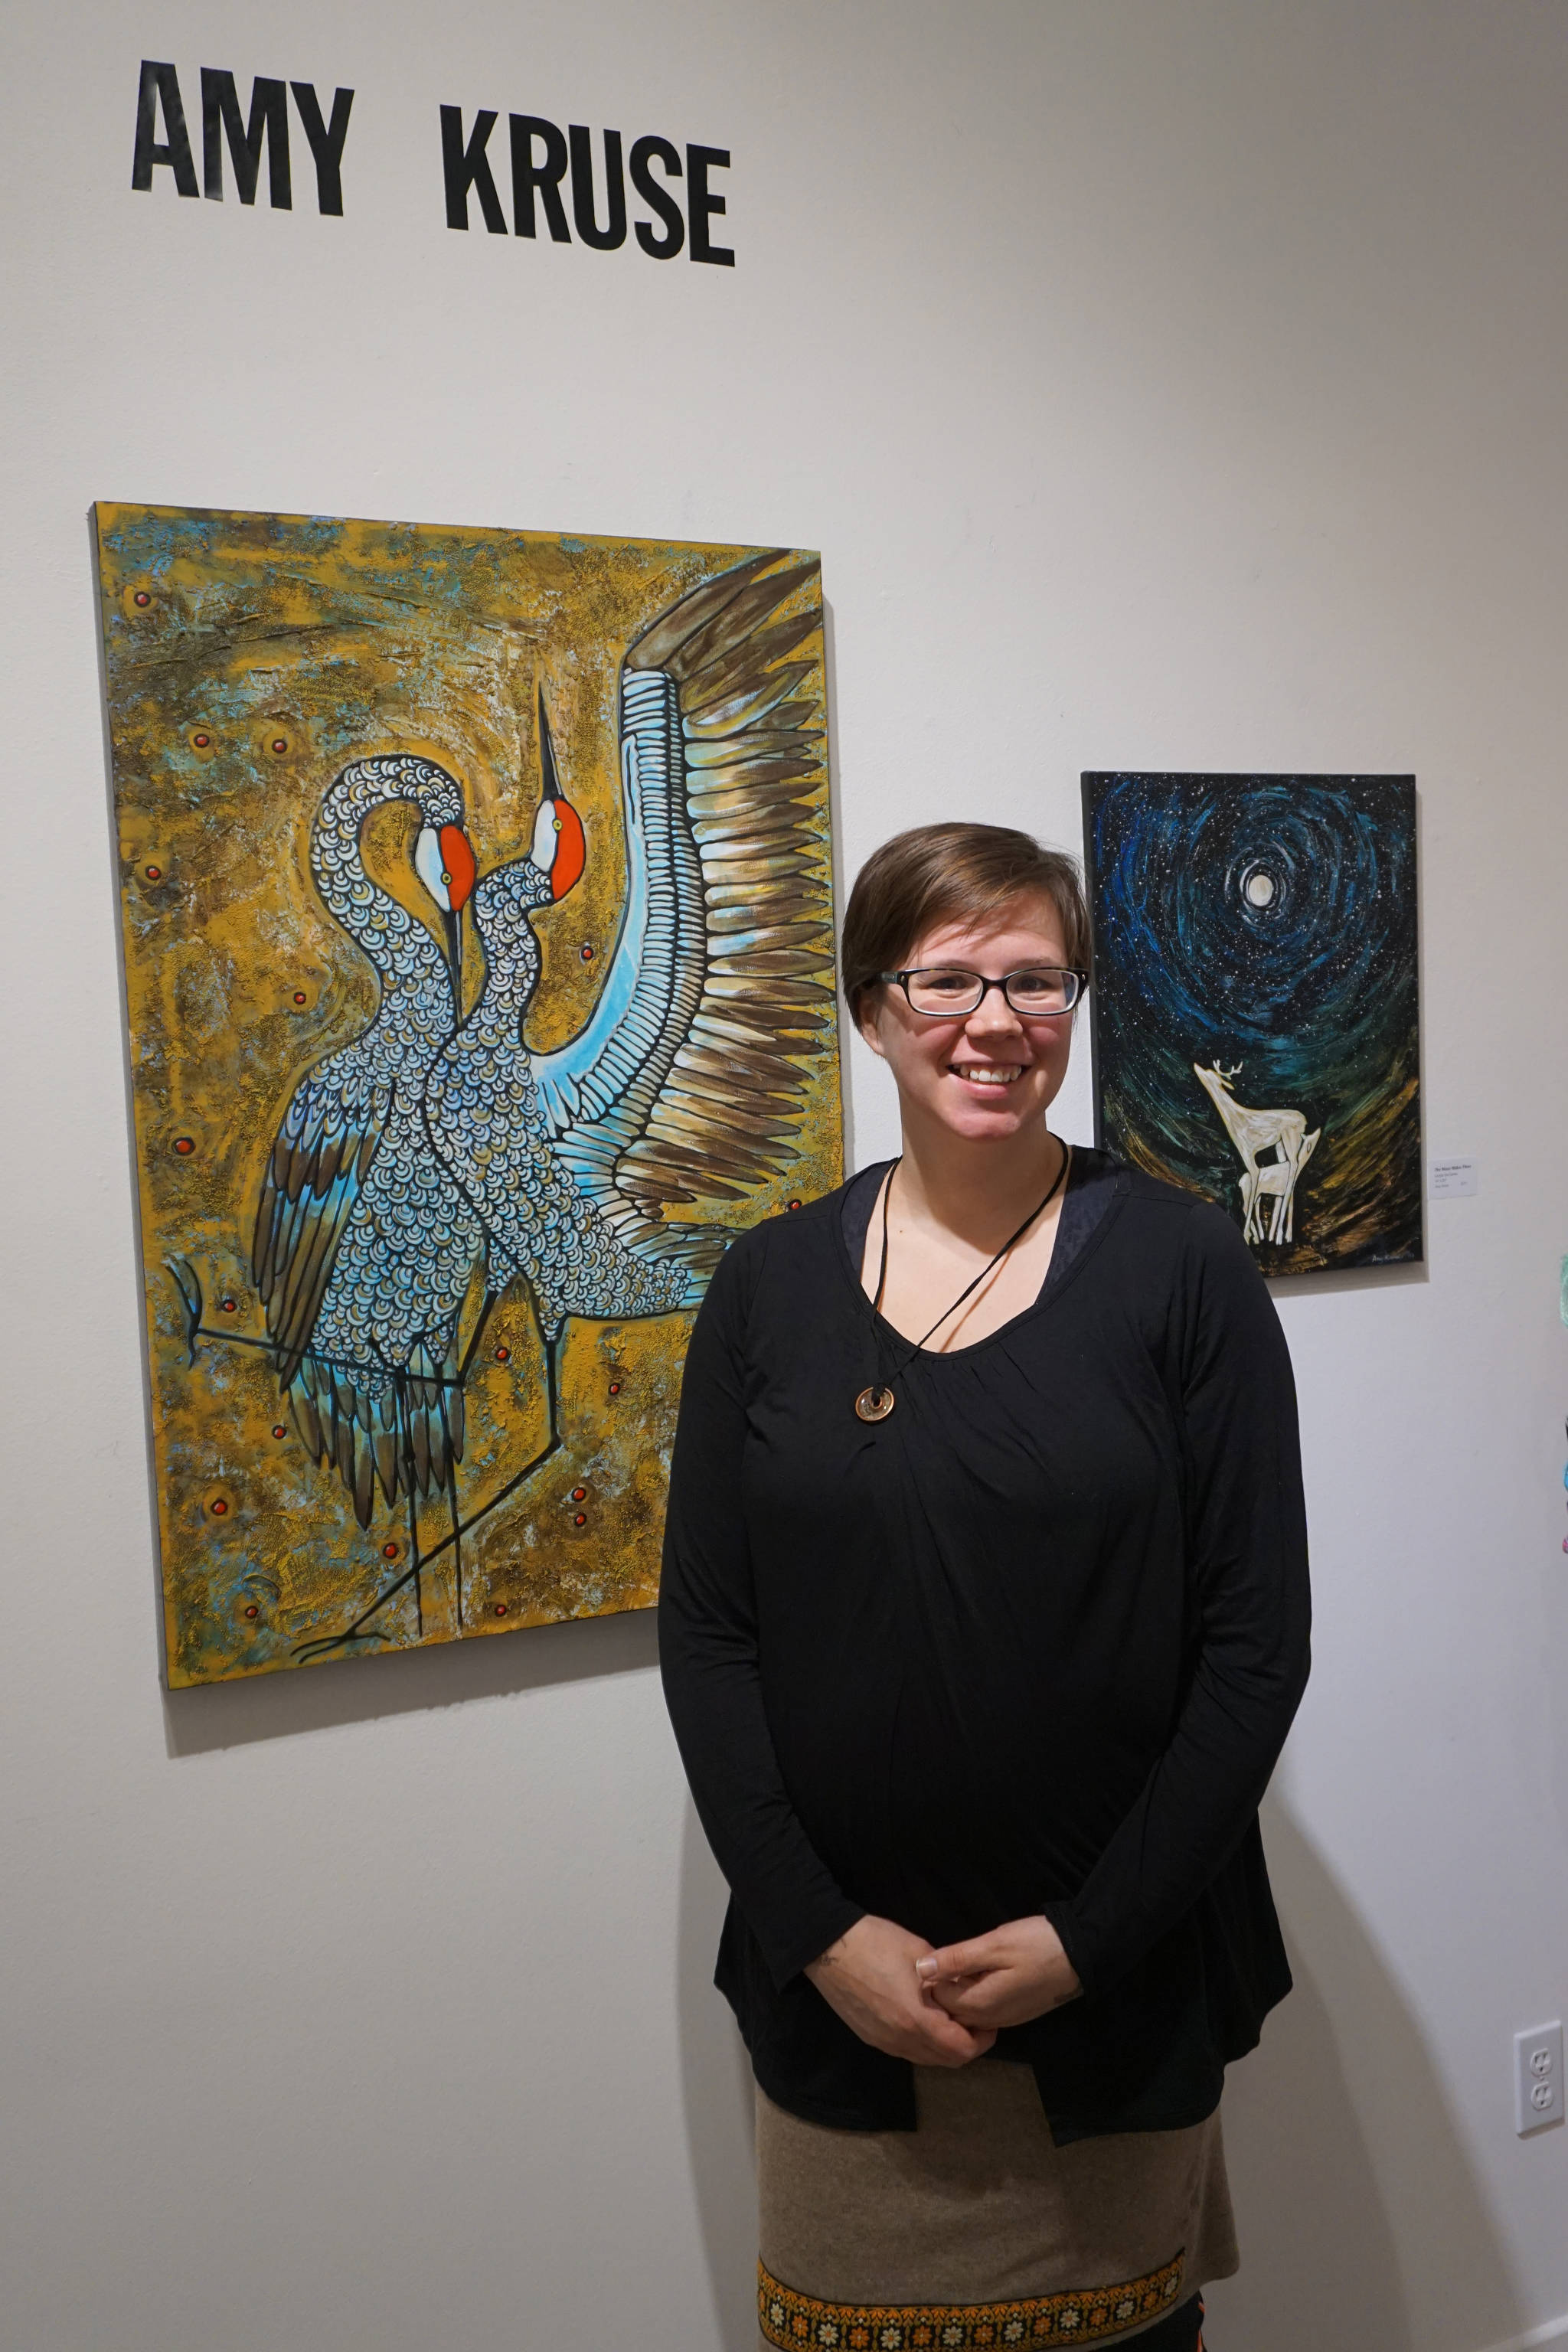 Amy Kruse poses for a photo at a First Friday reception on Dec. 1 2017 at Fireweed Gallery in Homer, Alaska. (Photo by Michael Armstrong, Homer News)